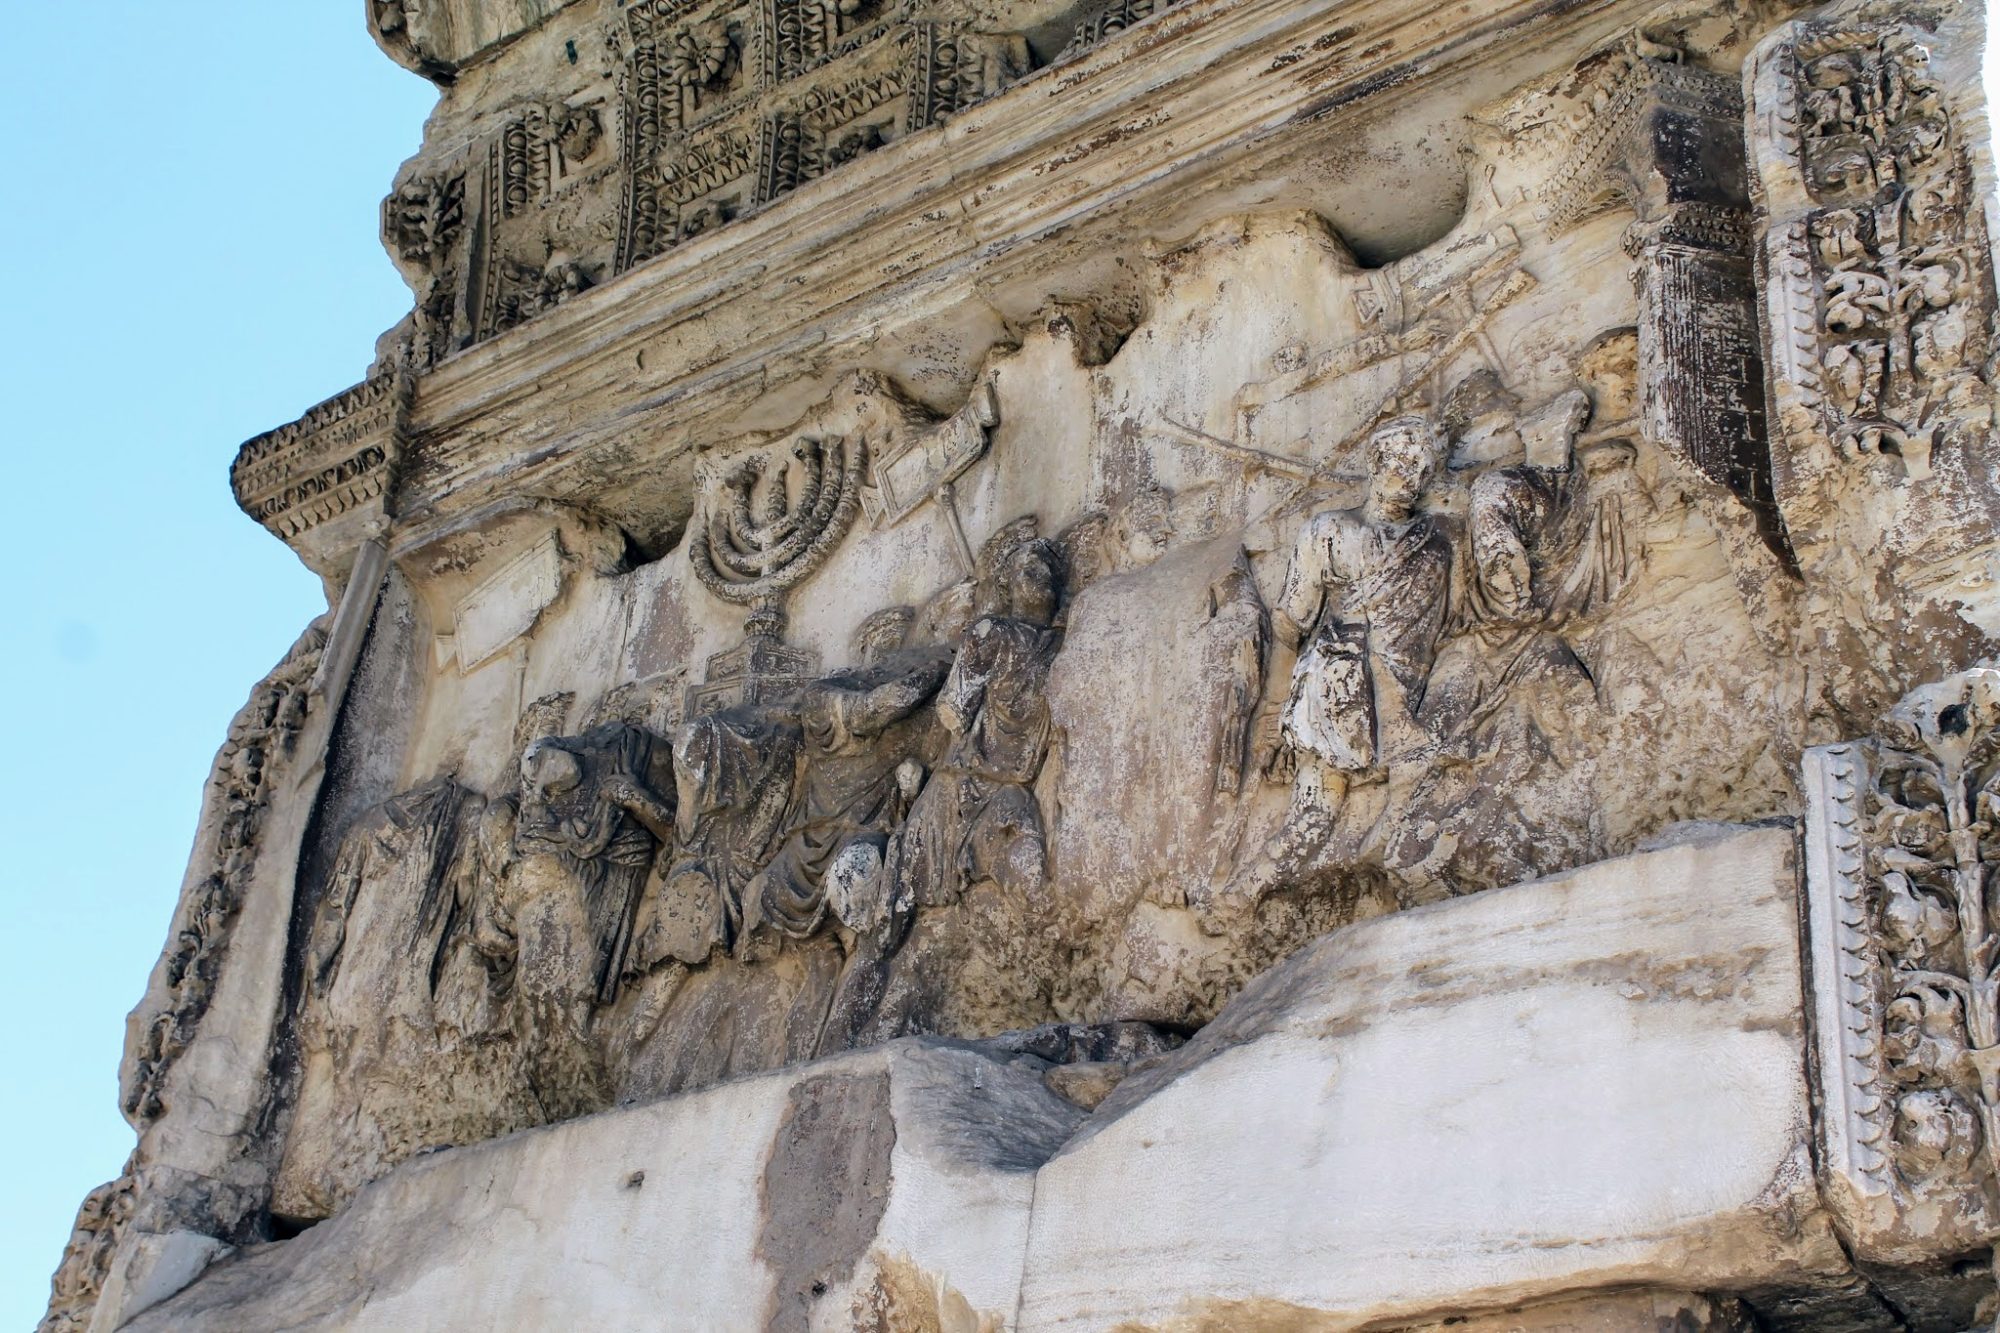 A panel from the Arch of Titus in Rome, portraying the triumph following the sack of Jerusalem by Titus in 71 AD